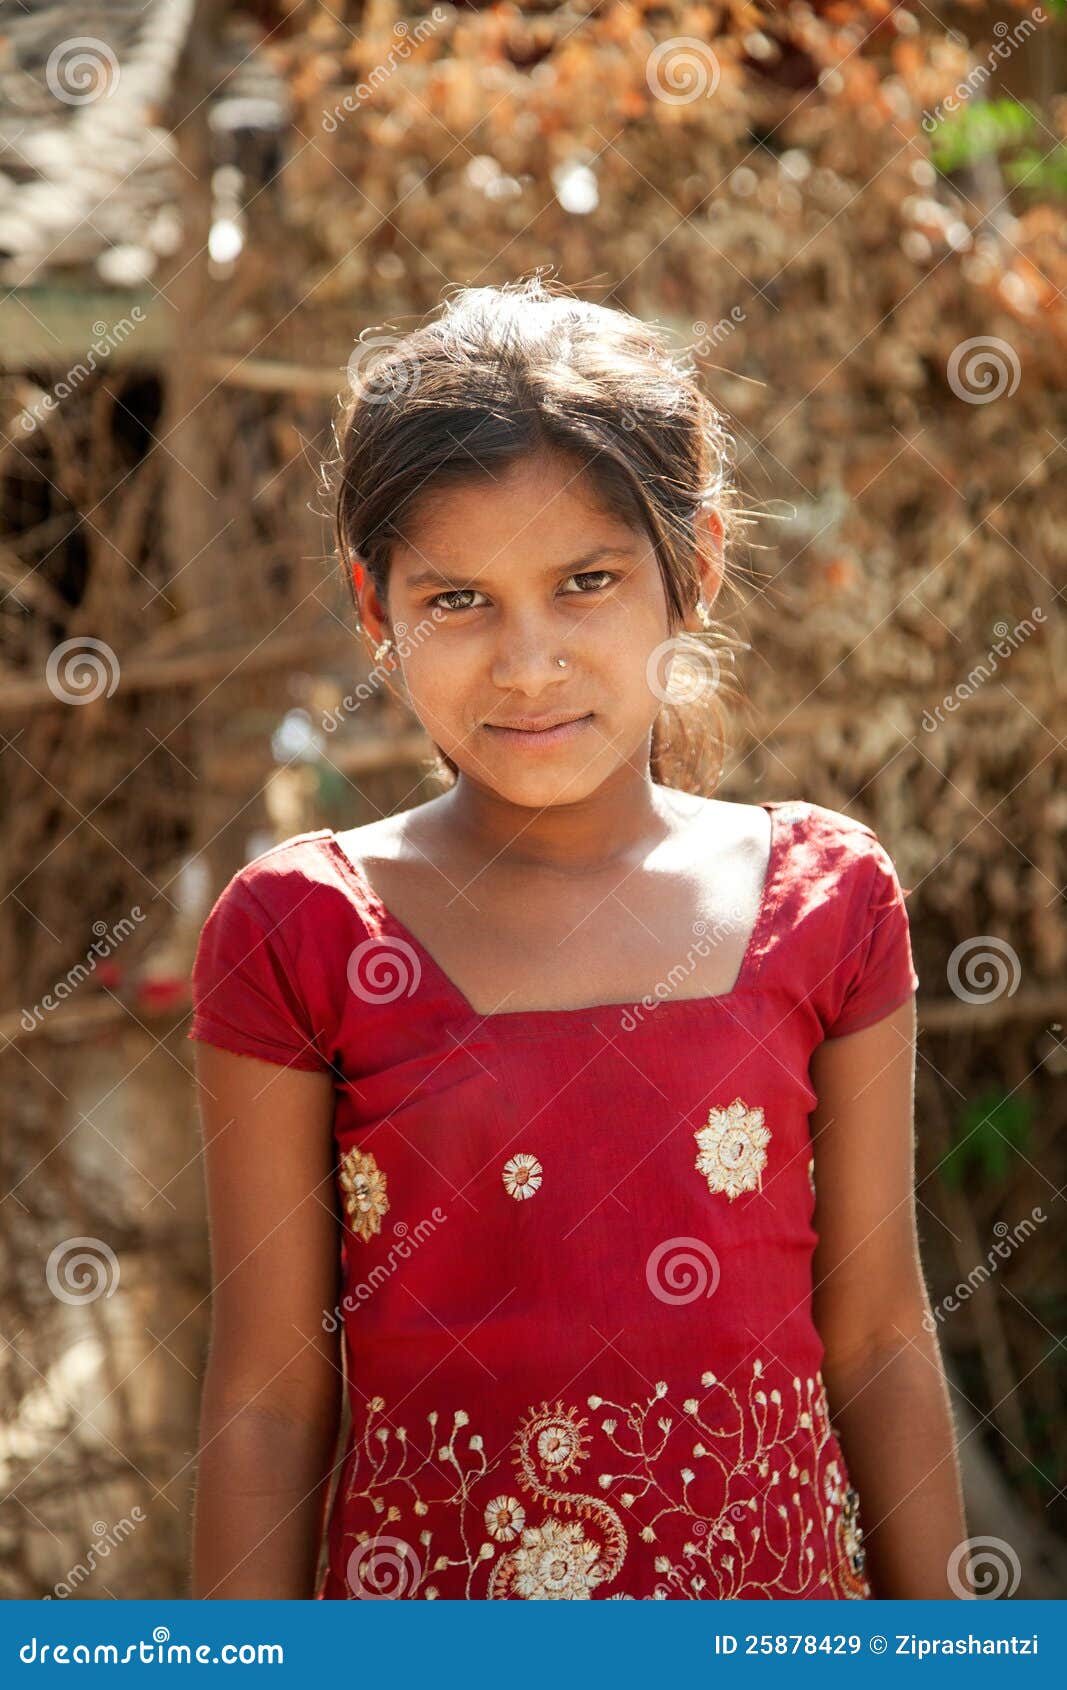 Innocent Smile Of Indian Female Child Editorial Stock 